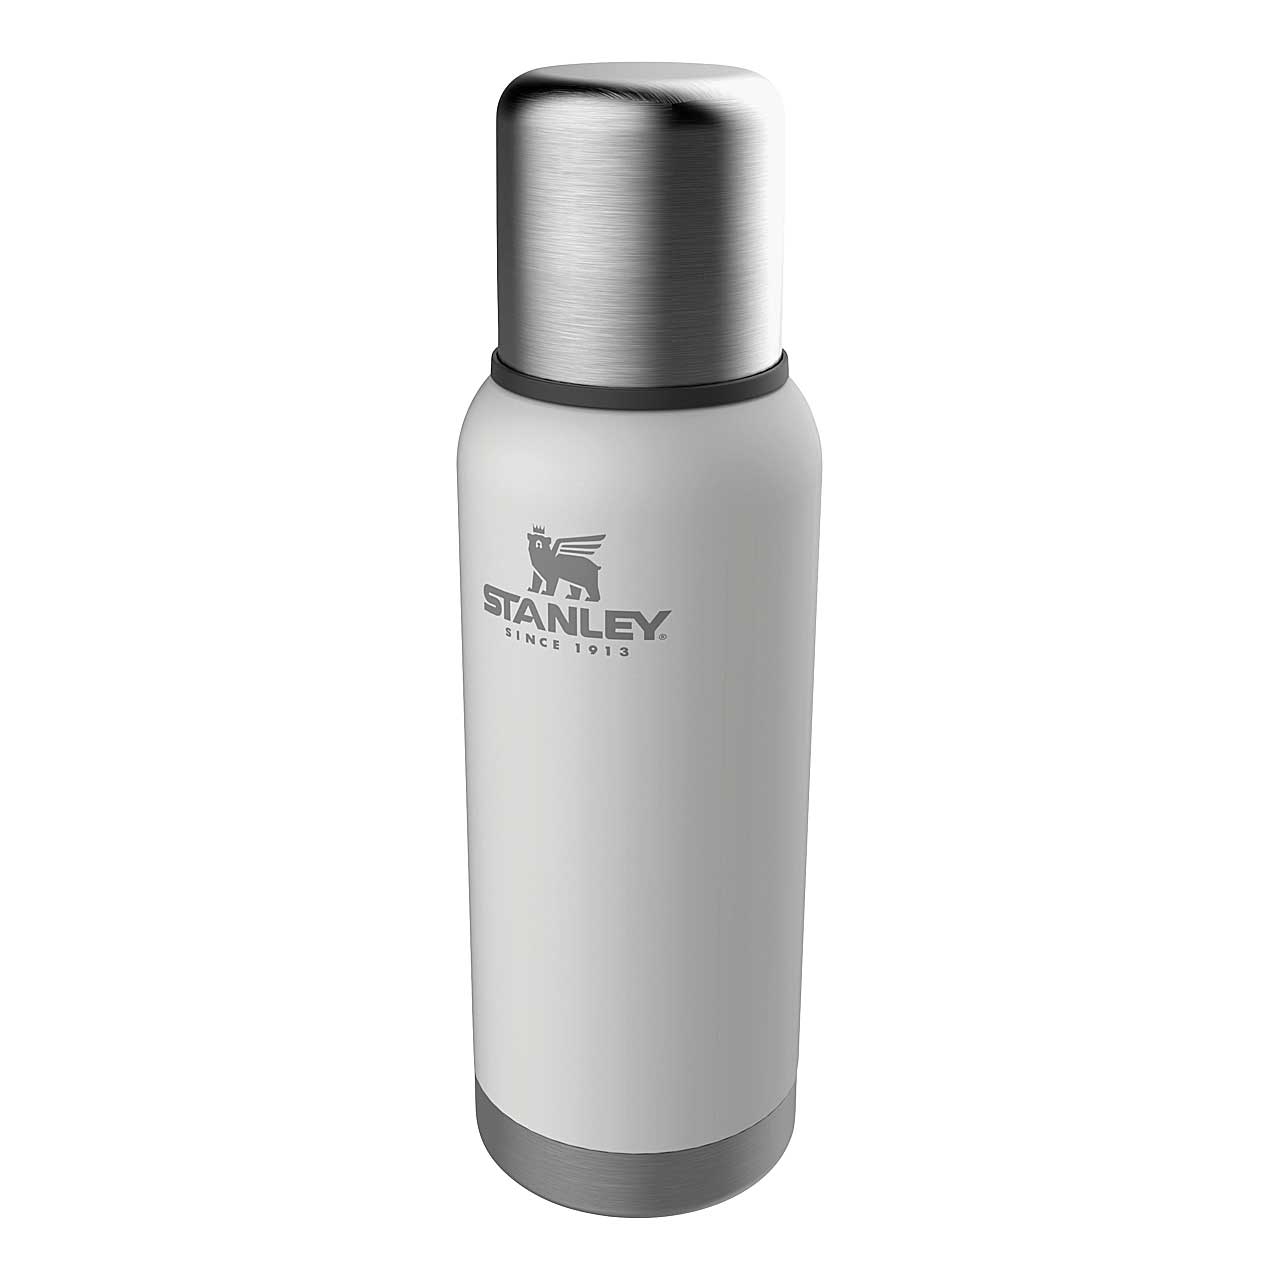 Picture of Stanley Adventure Stainless Steel Vacuum Insulated Bottle - 0.73 liter - Polar